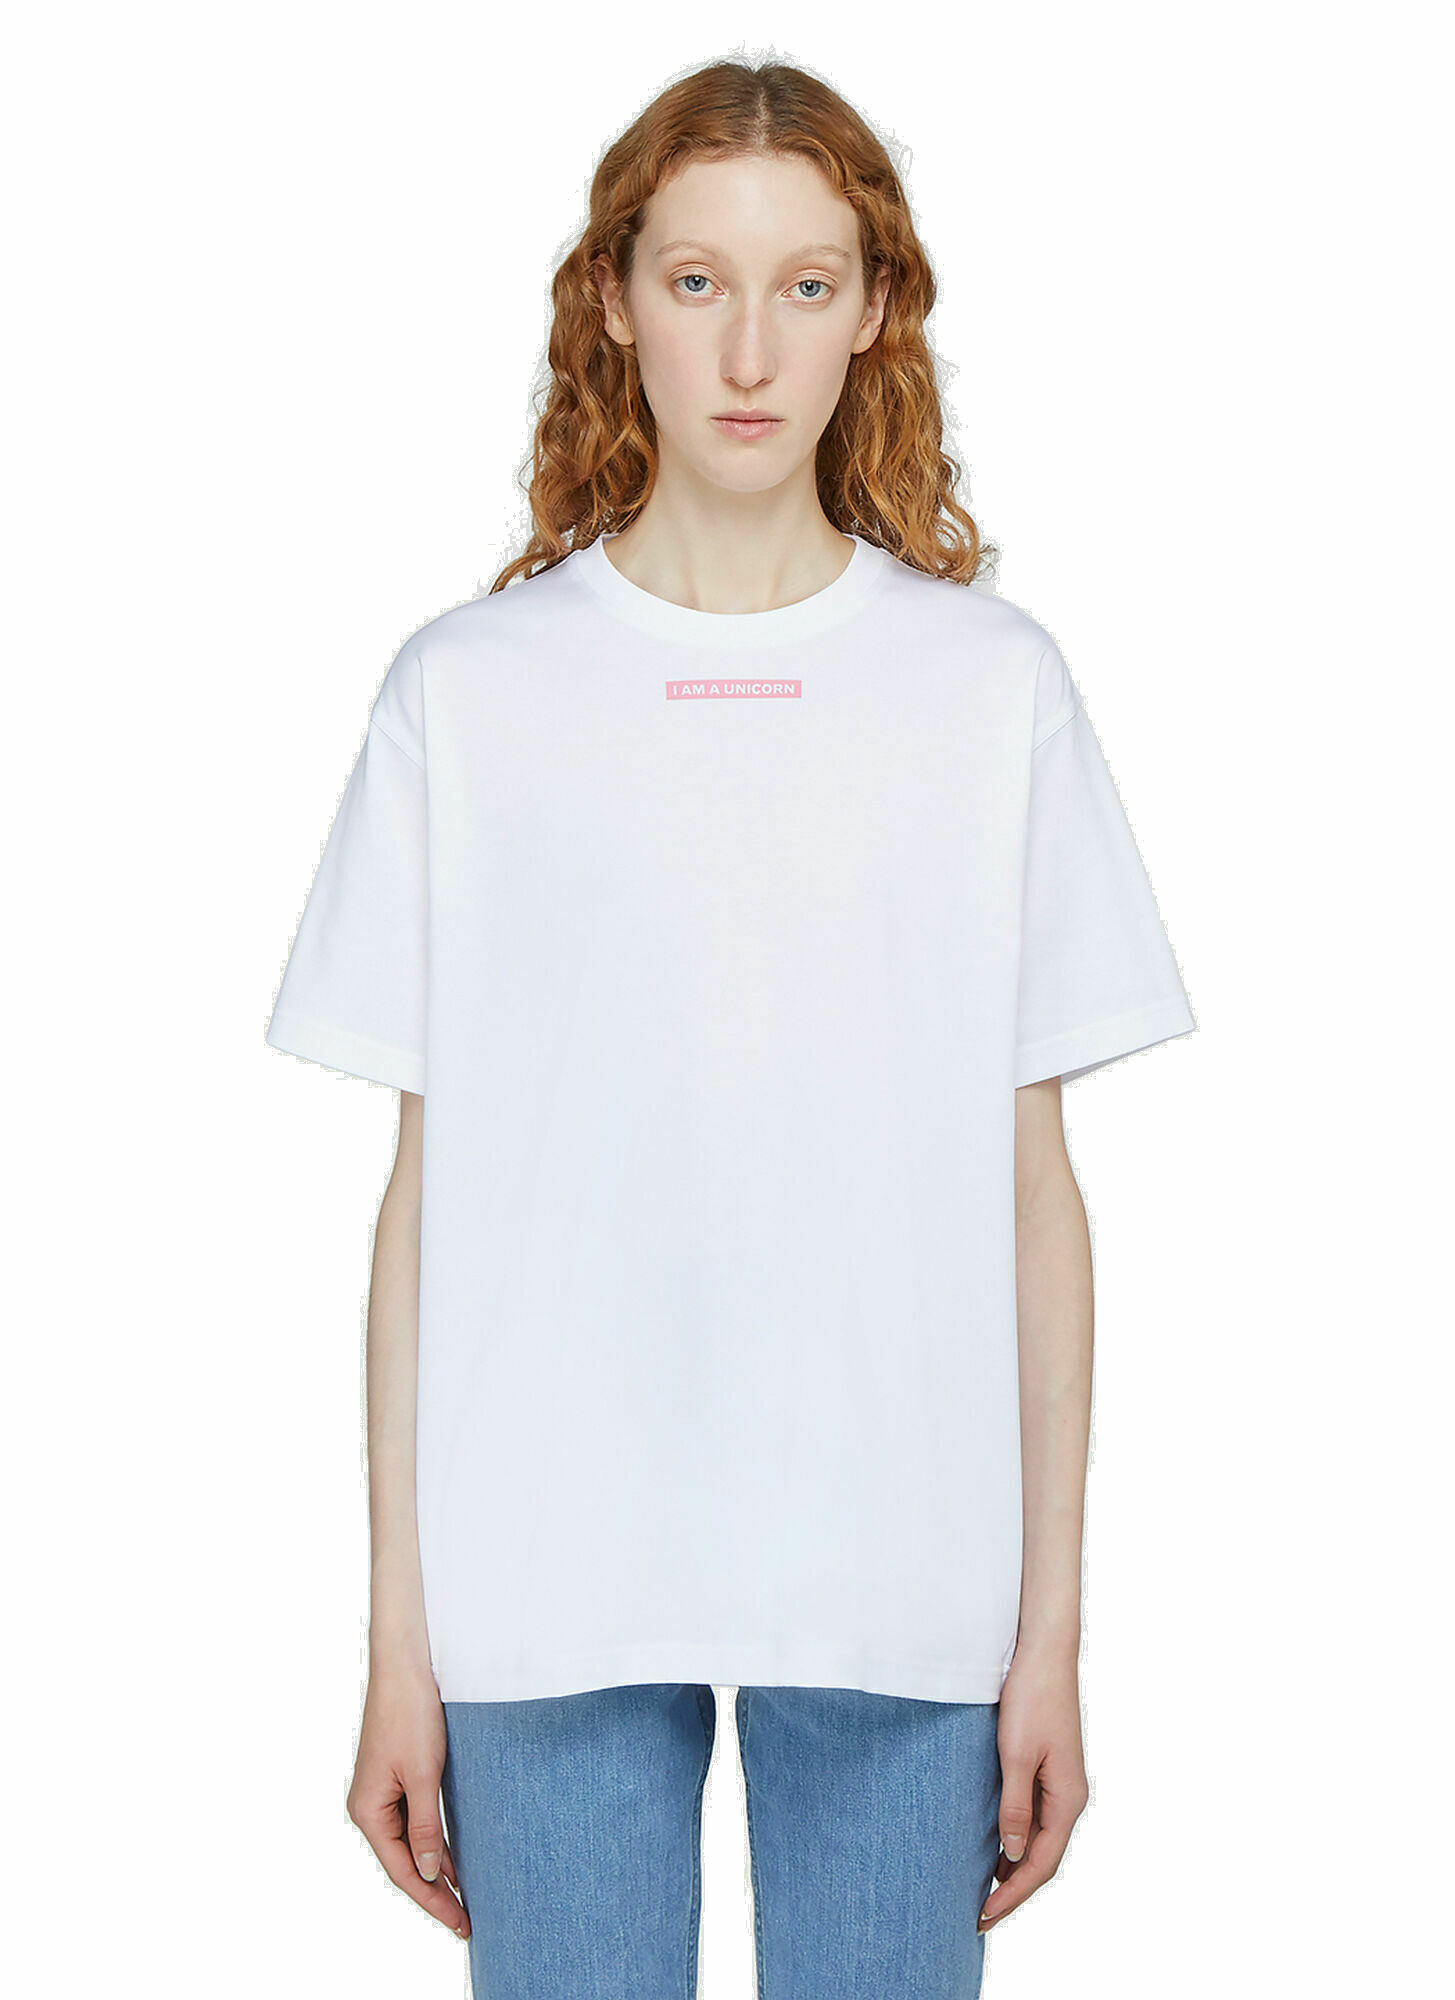 Burberry - I Am A Unicorn T-Shirt in White Burberry